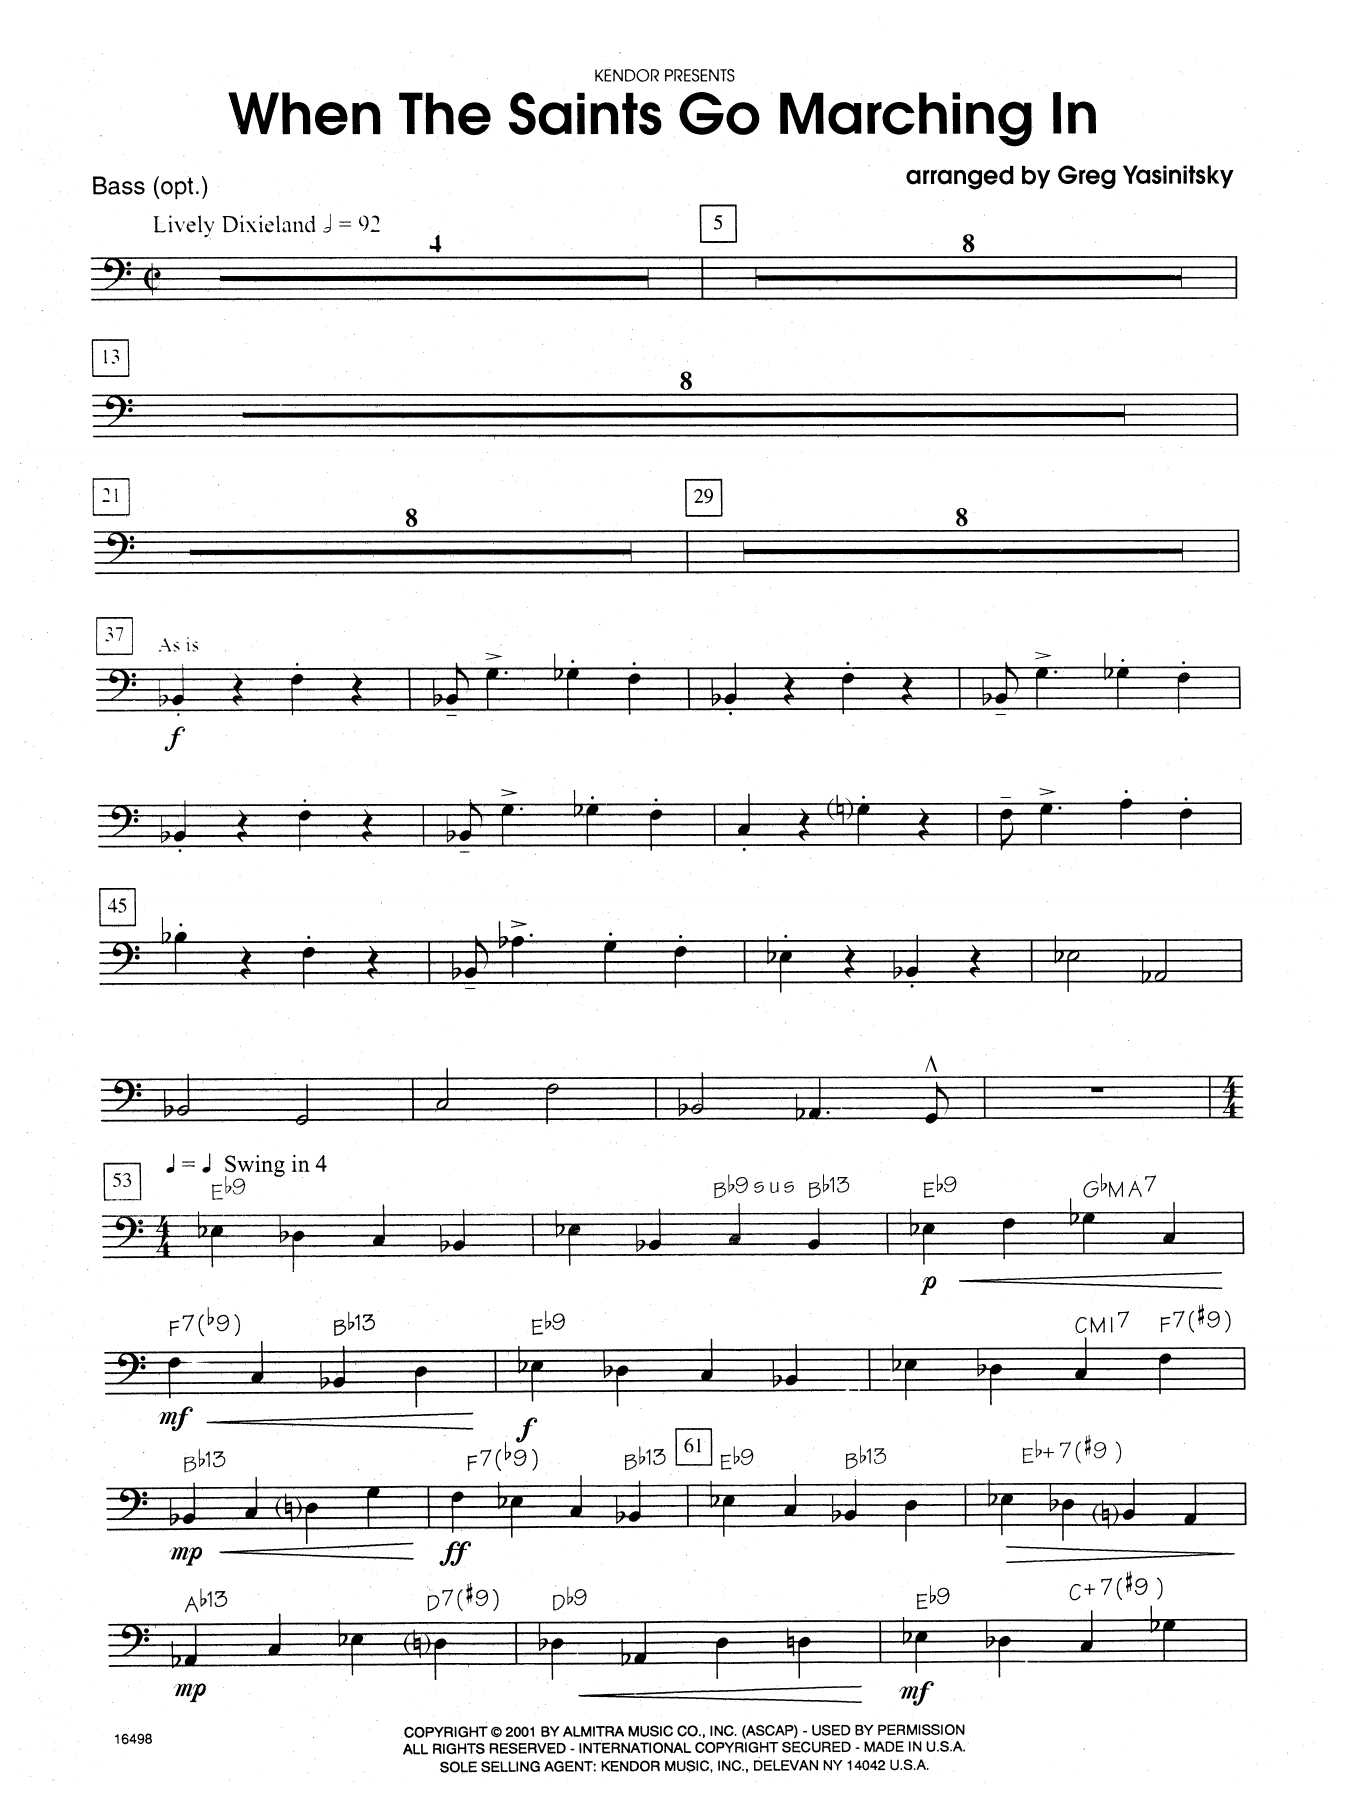 Download Gregory Yasinitsky When the Saints Go Marching In - Bass Sheet Music